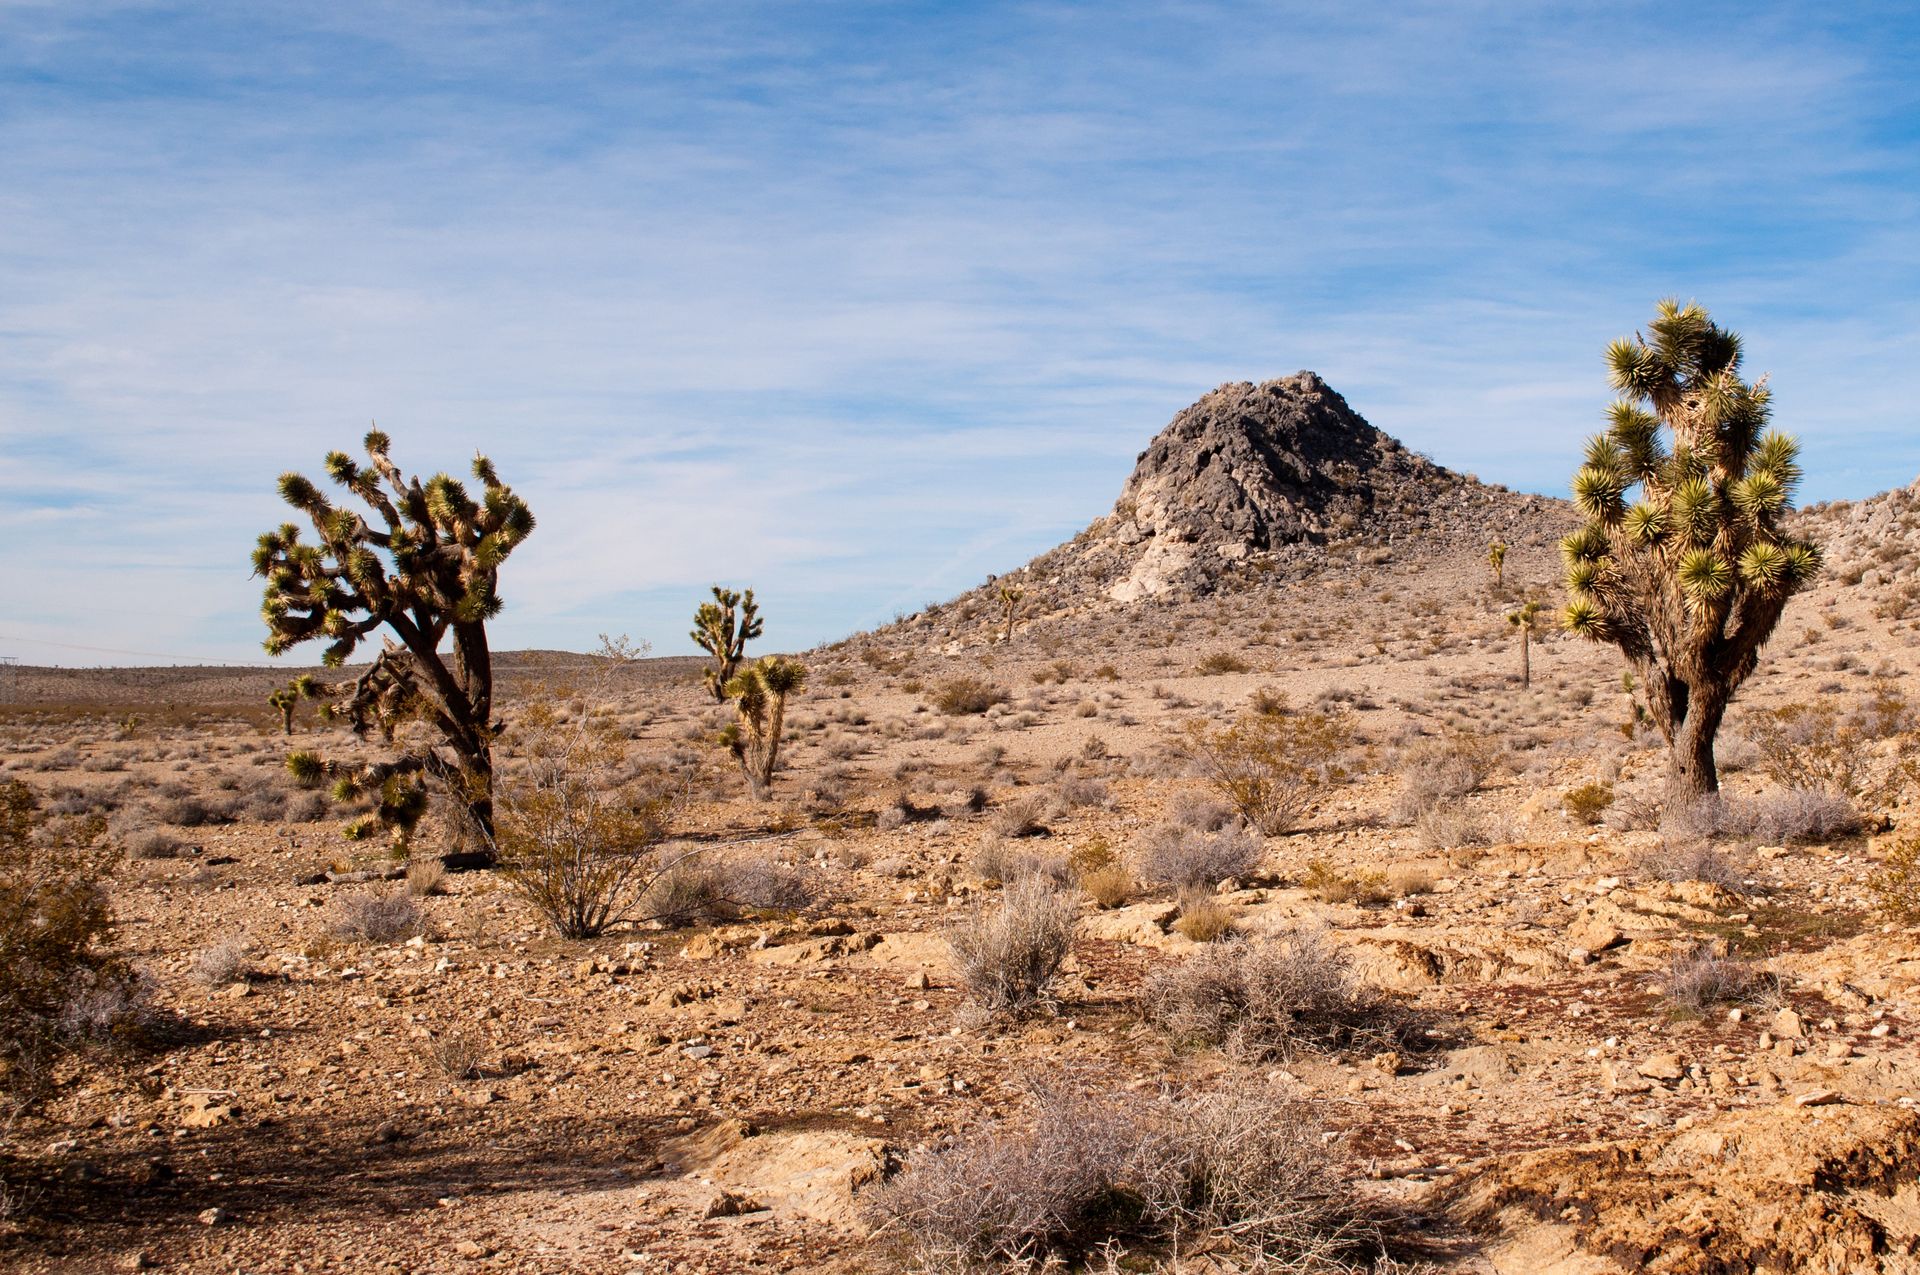 A desert landscape with cacti, tumbleweed, and shrubs.